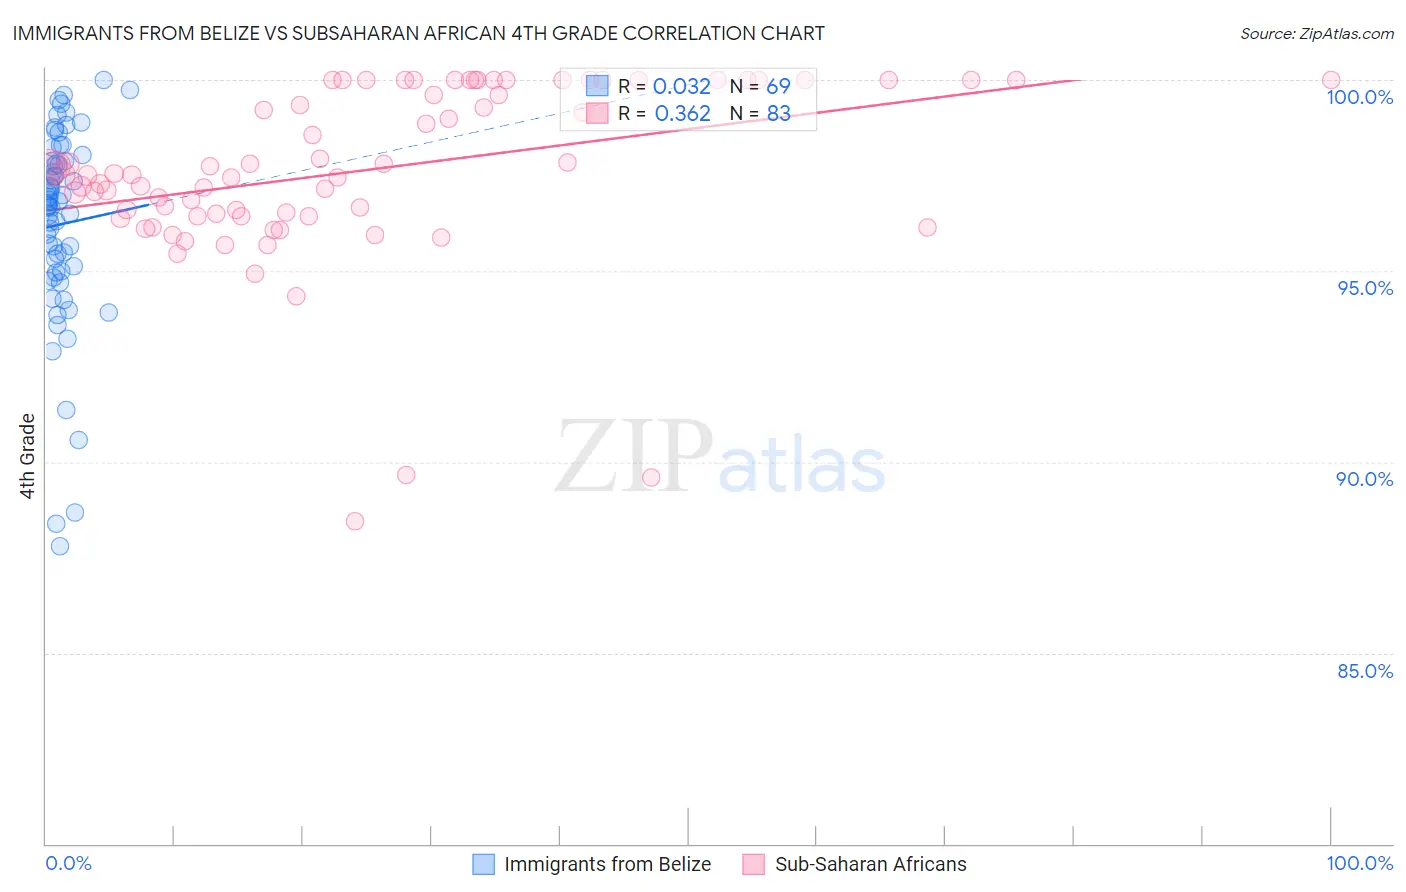 Immigrants from Belize vs Subsaharan African 4th Grade